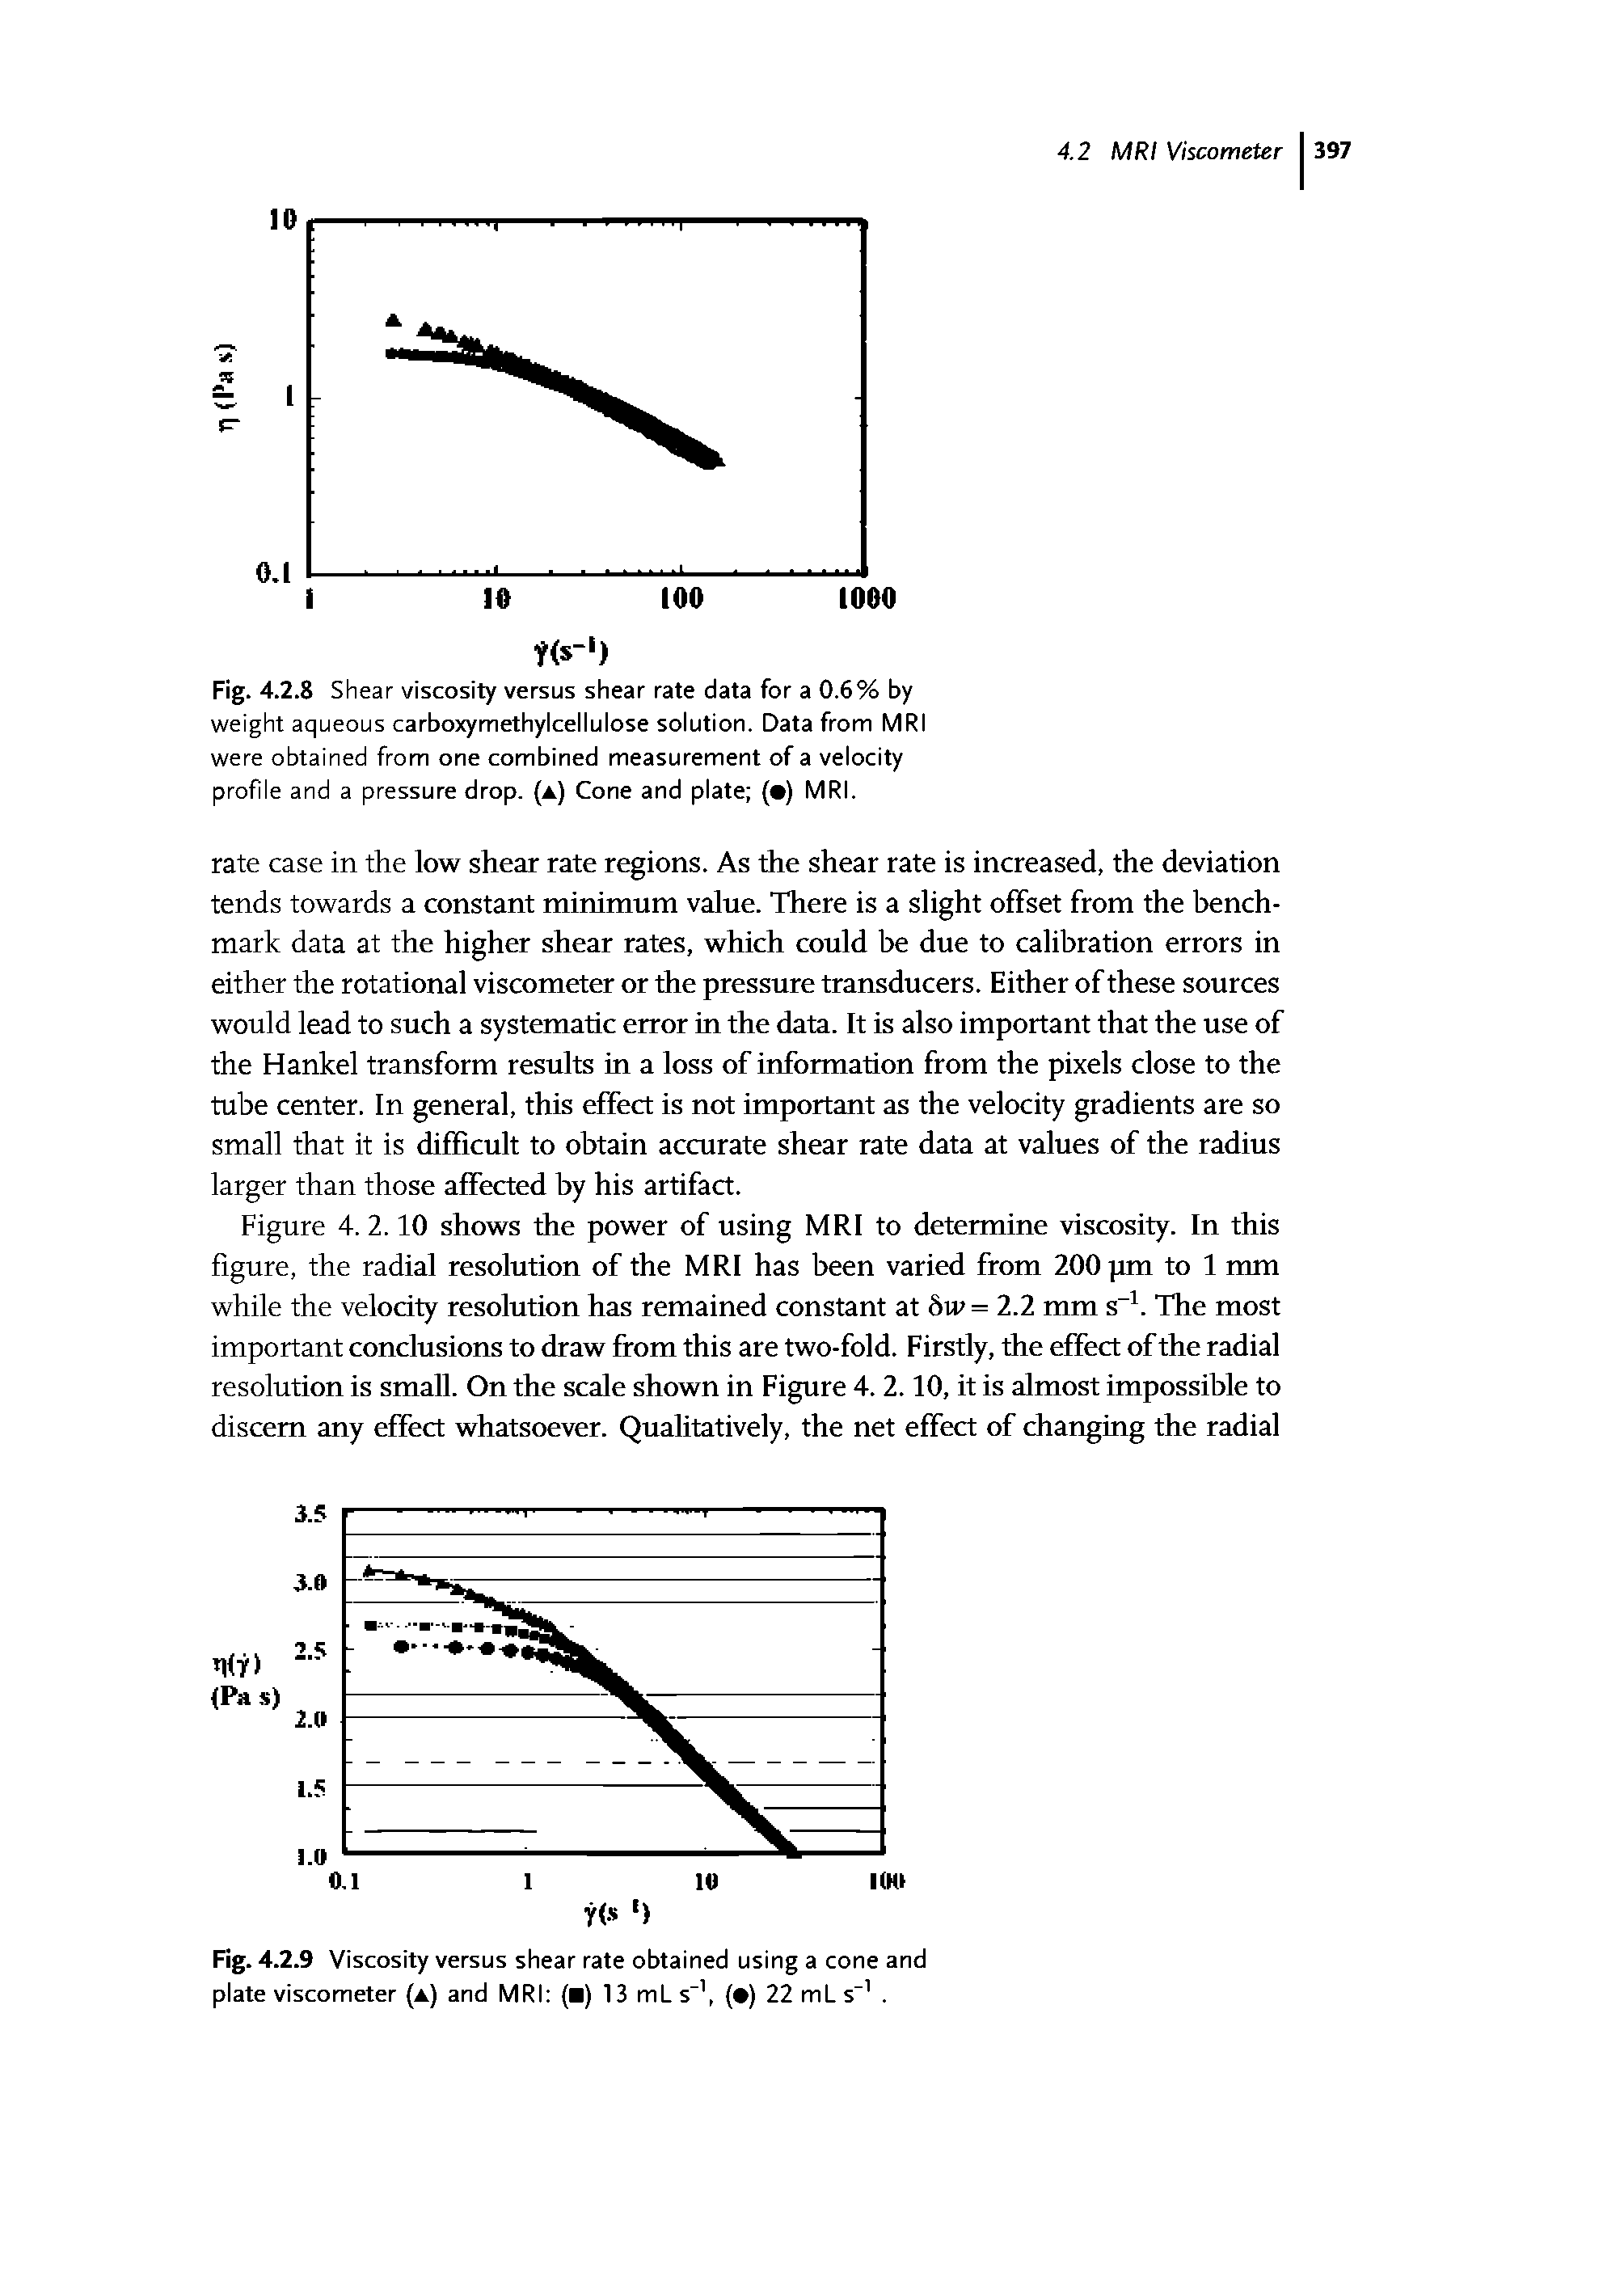 Fig. 4.2.8 Shear viscosity versus shear rate data for a 0.6% by weight aqueous carboxymethylcellulose solution. Data from MRI were obtained from one combined measurement of a velocity profile and a pressure drop, (a) Cone and plate ( ) MRI.